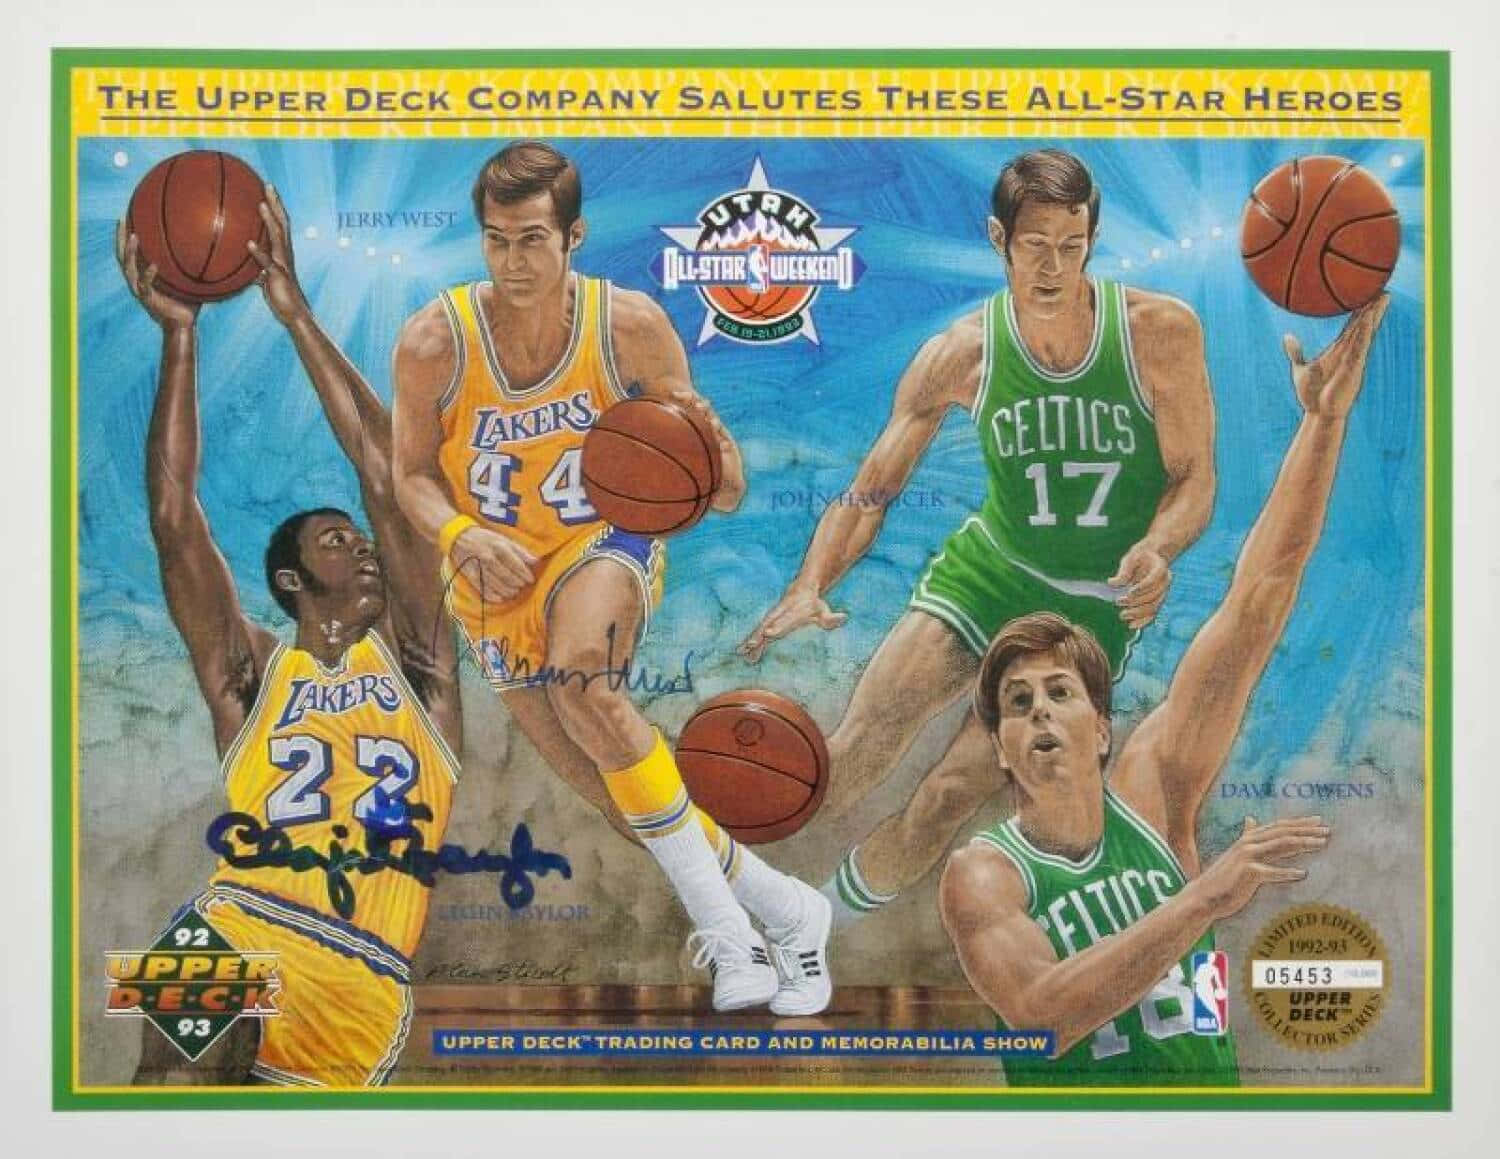 Dave Cowens With Other All-Star Heroes Fanart Wallpaper